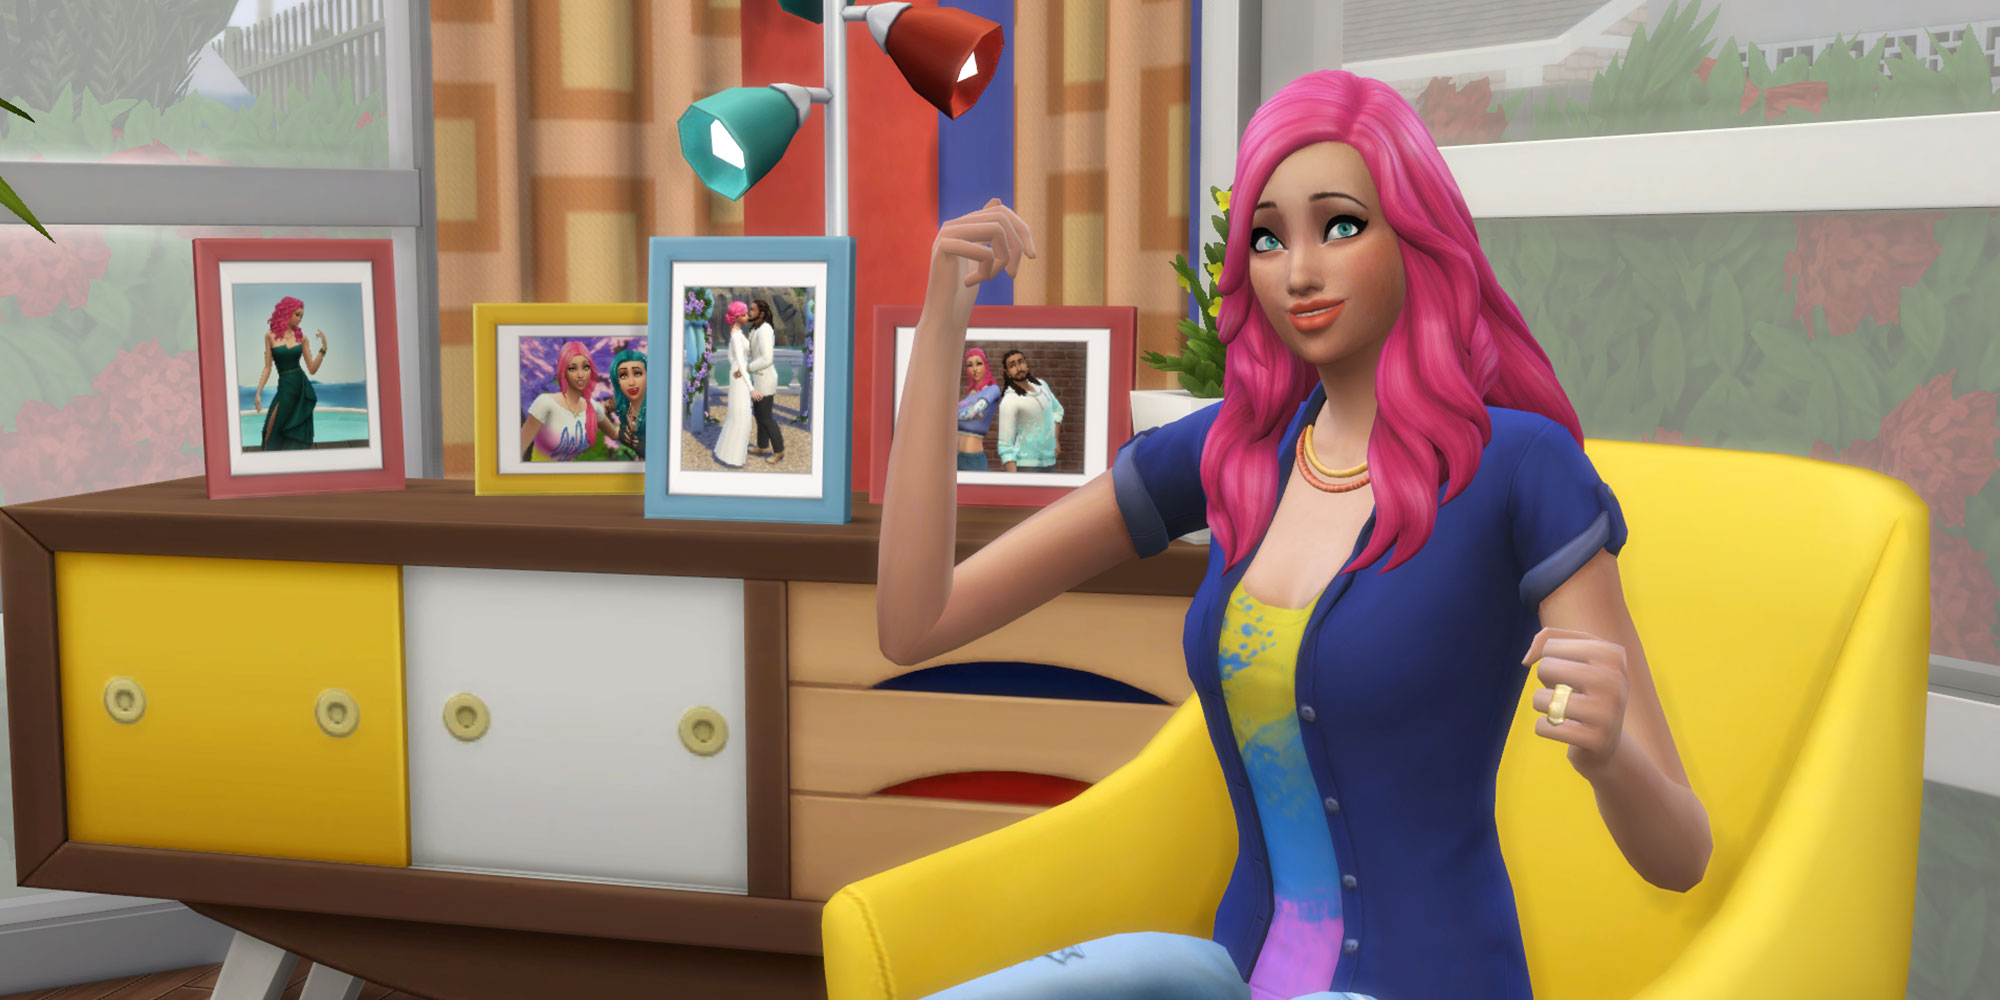 The Sims 4 Update New Ways to Display Photographs Sims Online